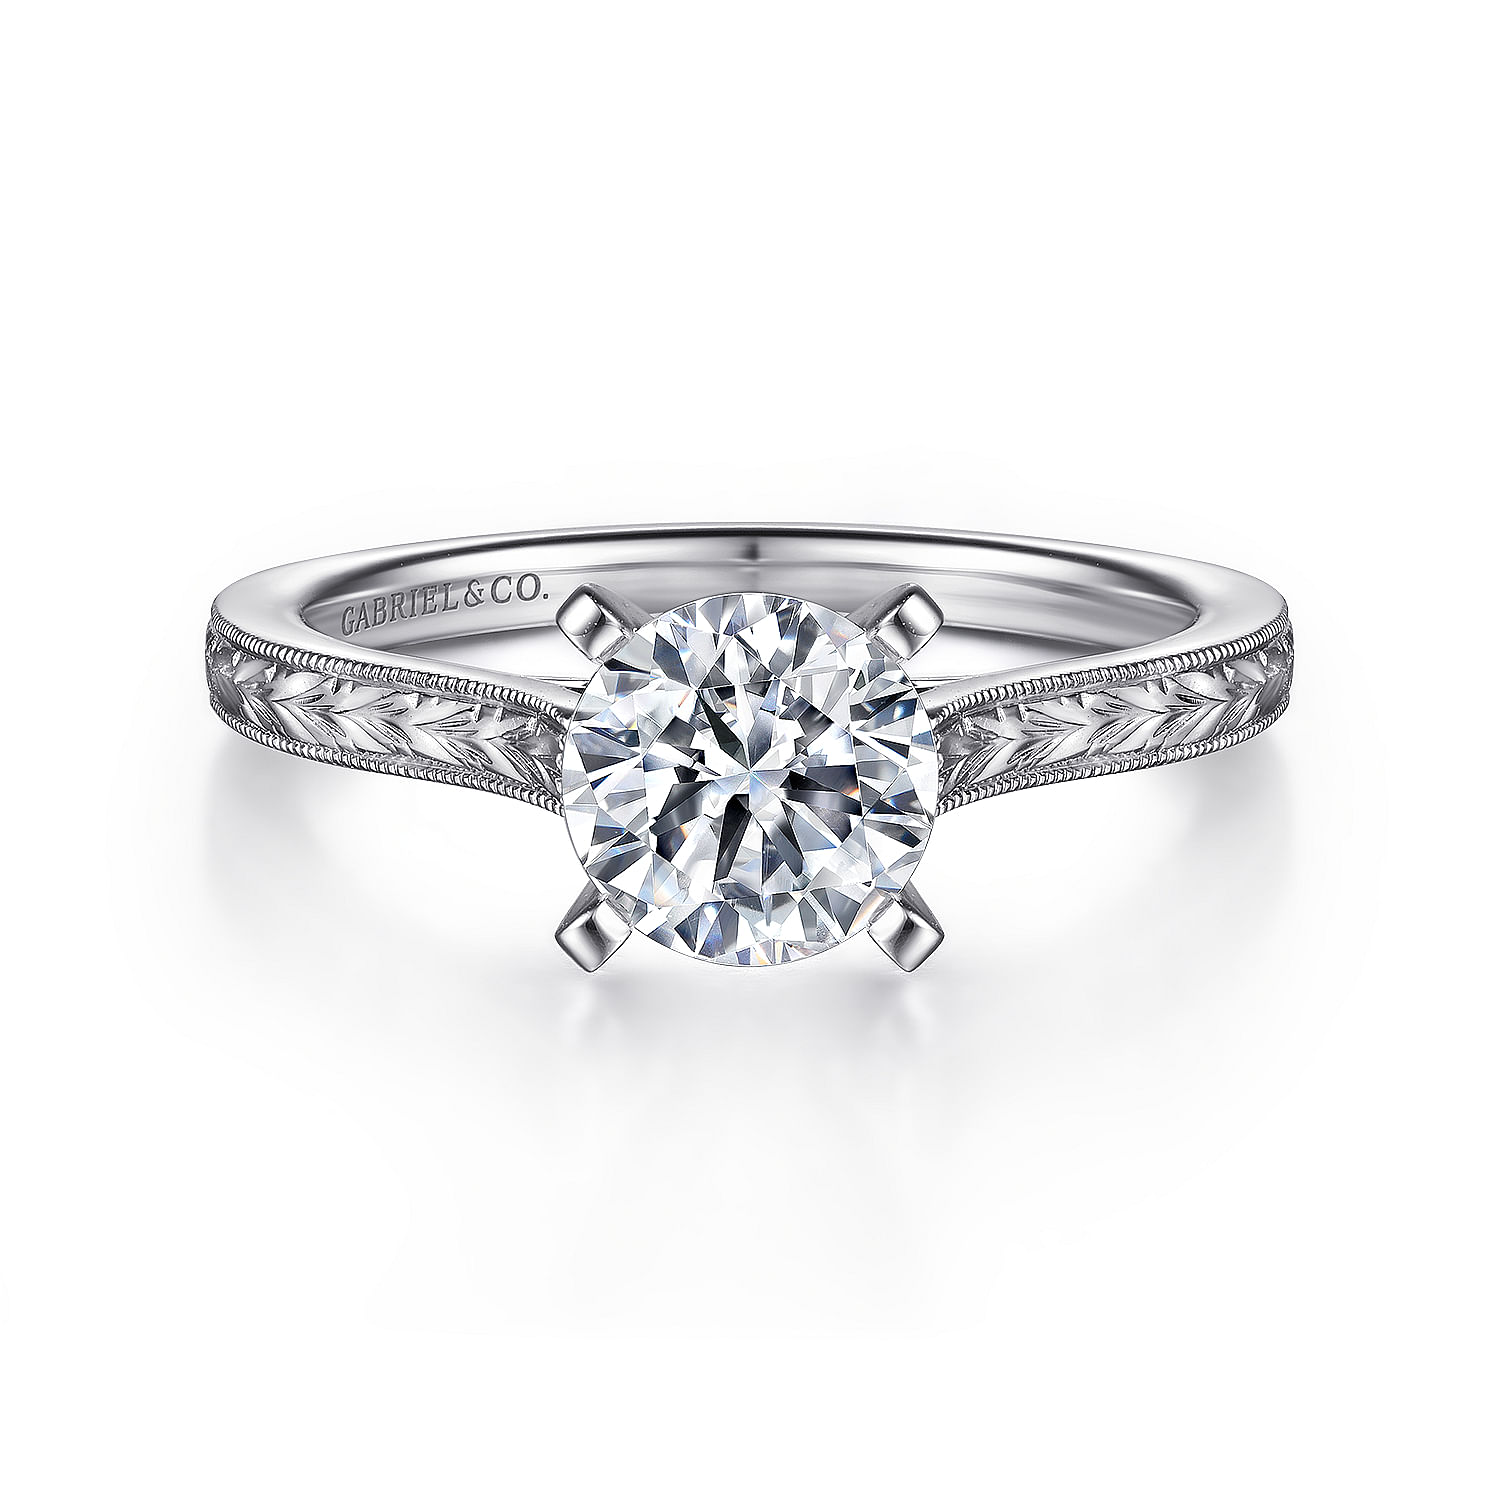 Gabriel - Vintage Inspired 14K White Gold Round Solitaire Engagement Ring